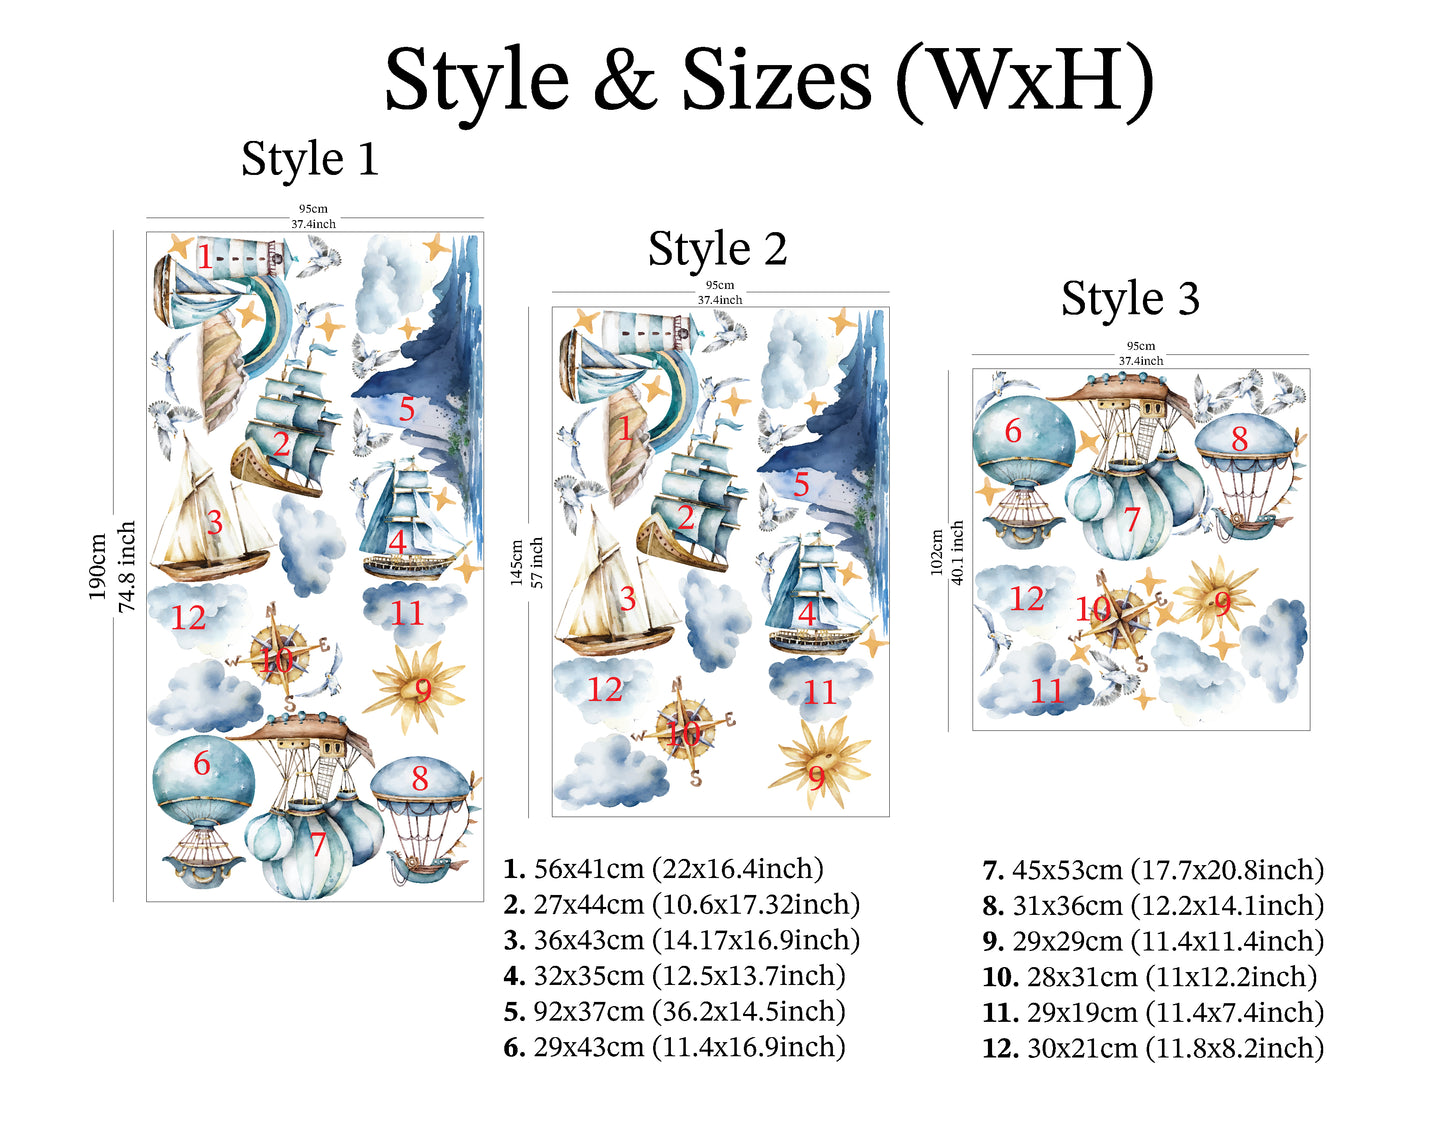 Textile Decals Sizes and Style of vintage ships and hot air balloons, creating a whimsical travel-themed ambiance